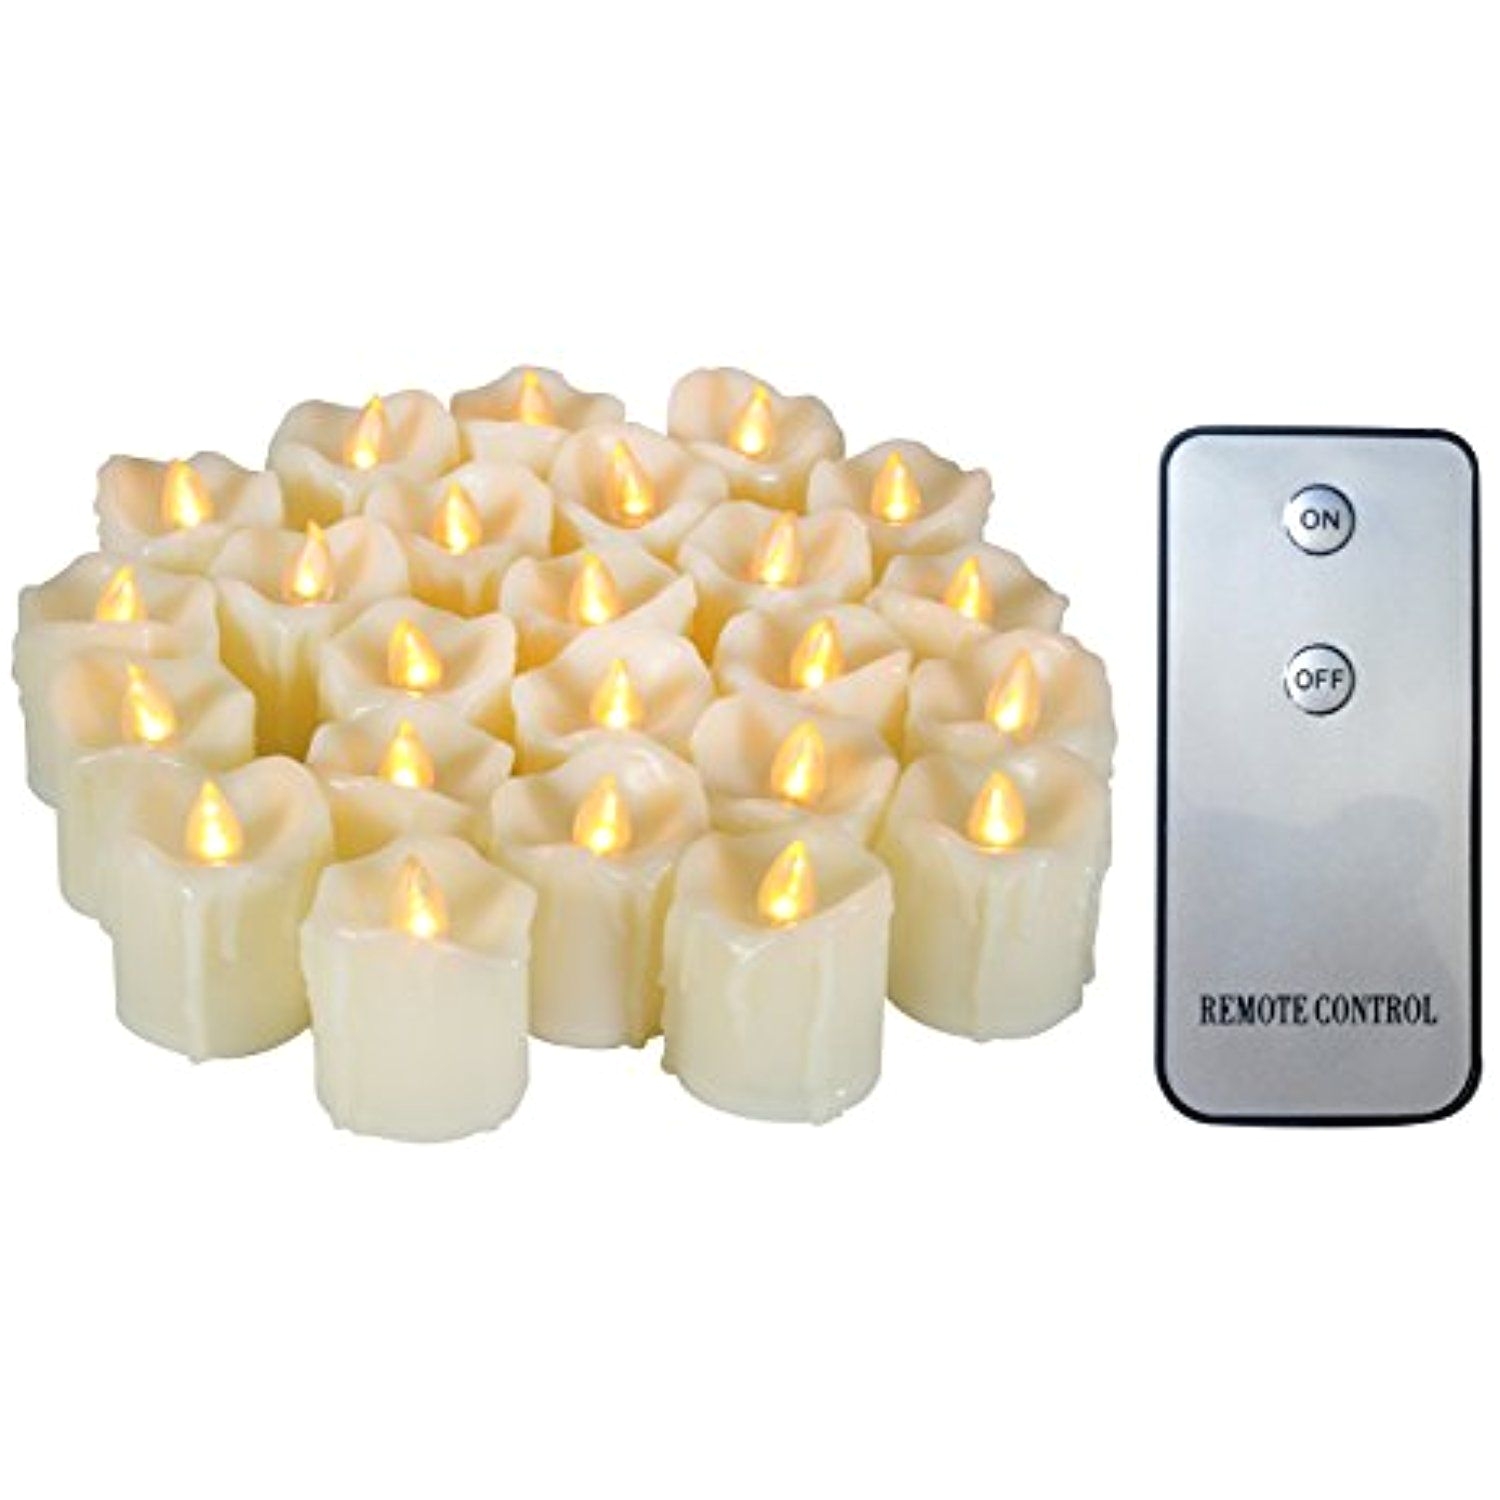 candle choice 24 pack realistic flameless votive candles bright battery operated led votives with remote 1 5a¢e x2a¢e drips long lasting festival pa